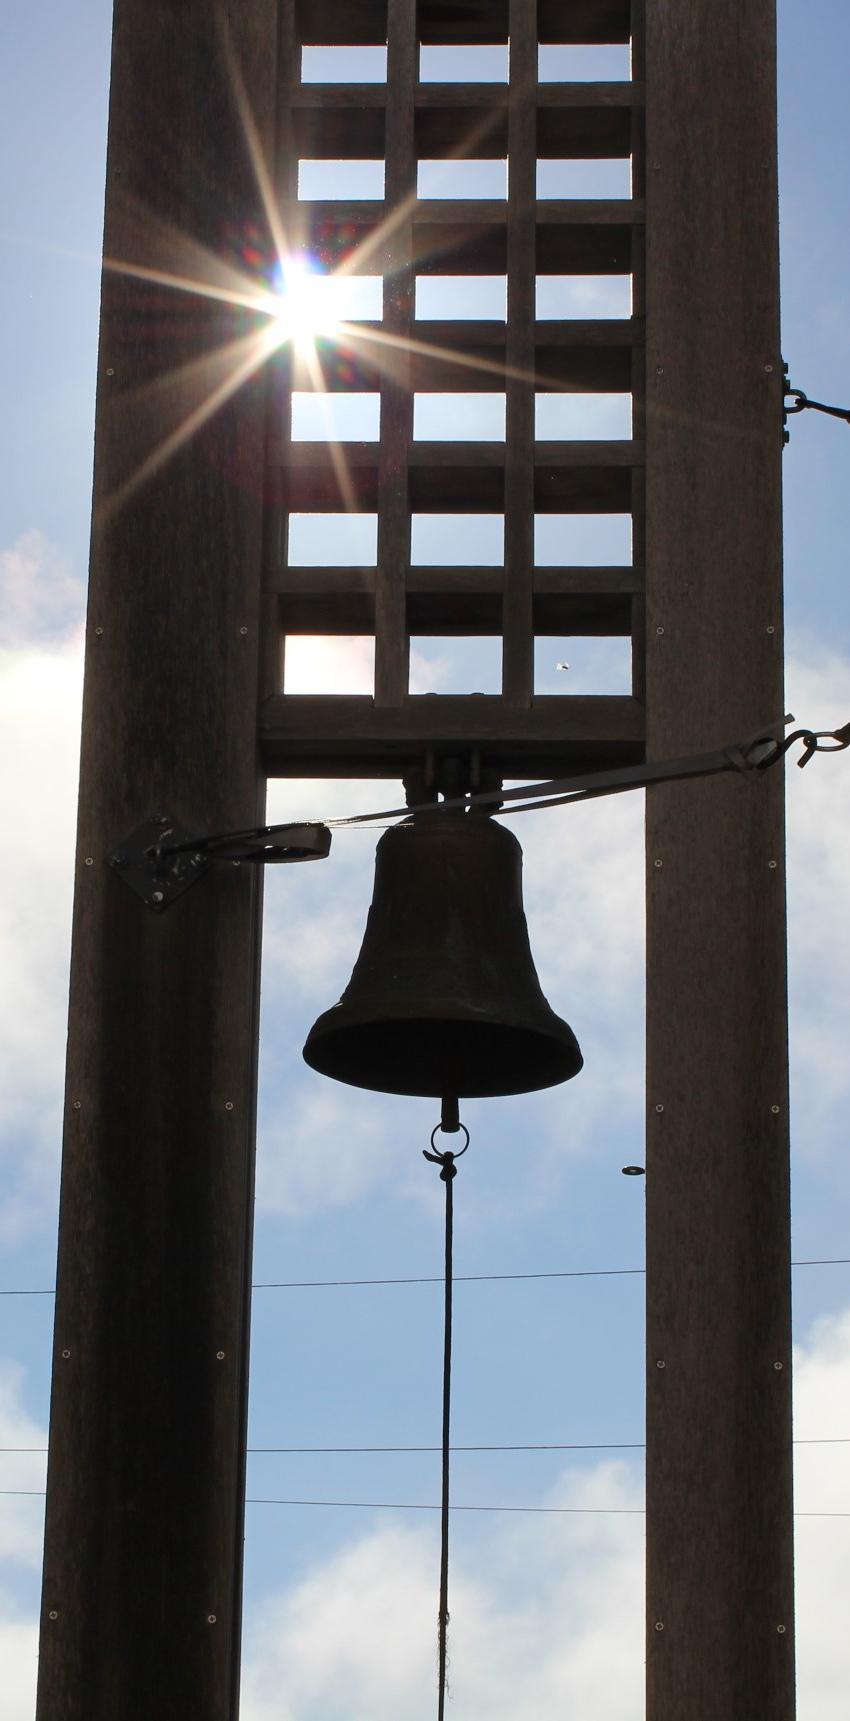 A bell hanging from a tall structure with a sunny sky background.